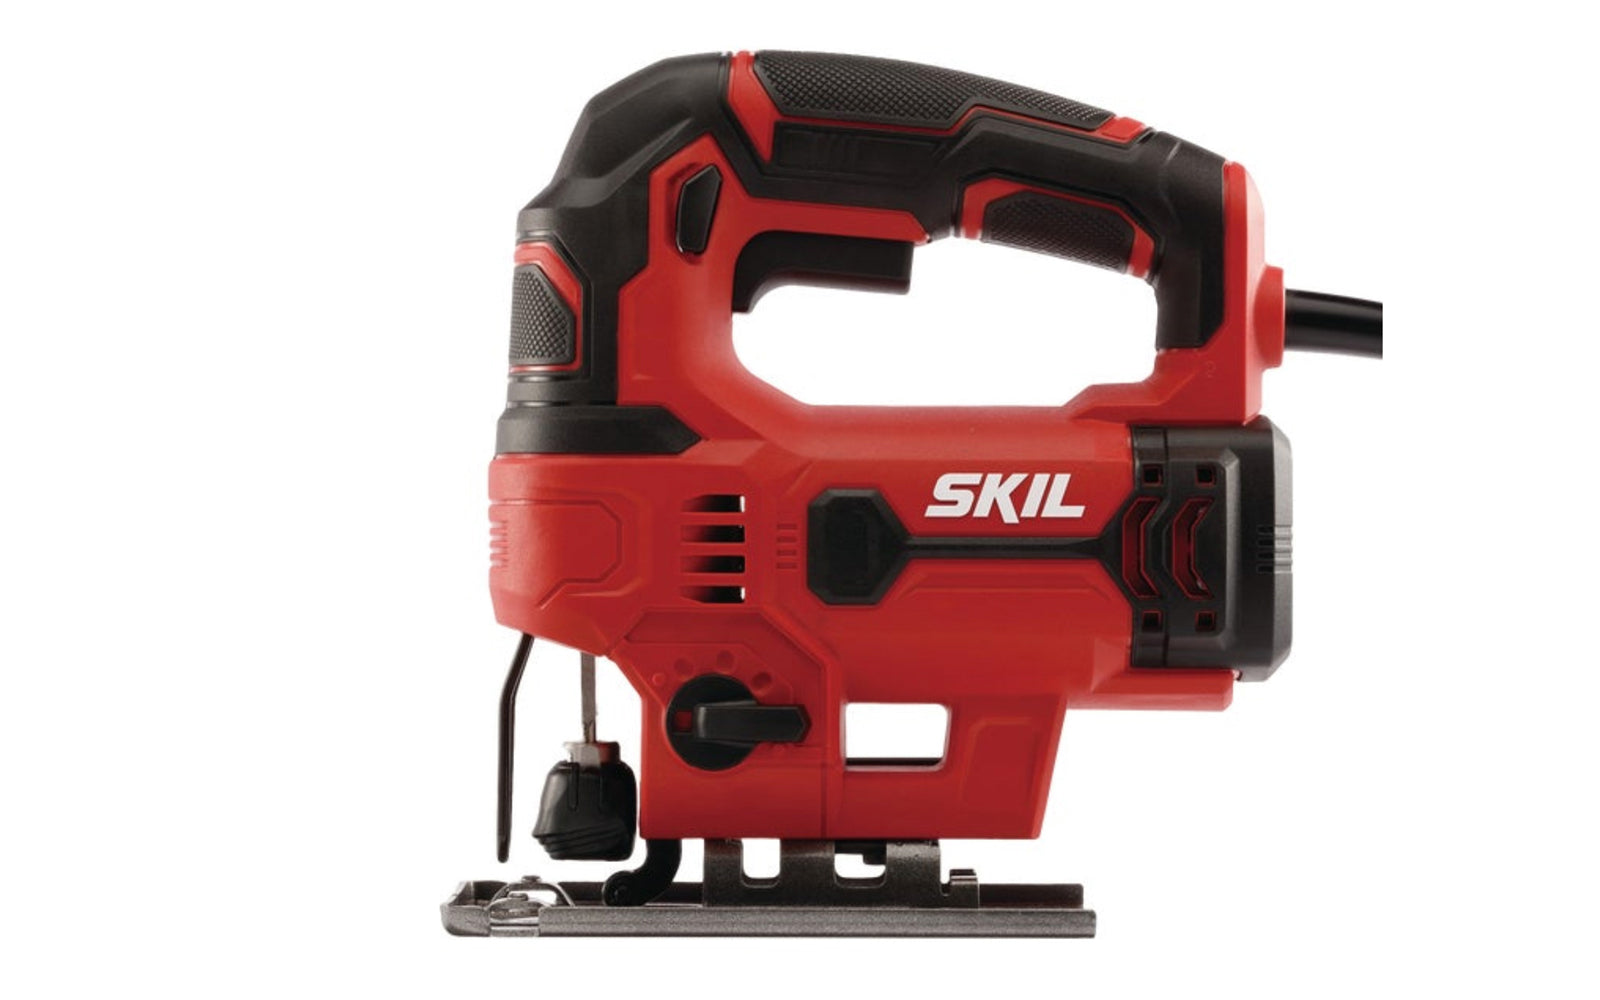 Skil 5.0A Corded Jig Saw. Variable Speed. Model No. JS313101